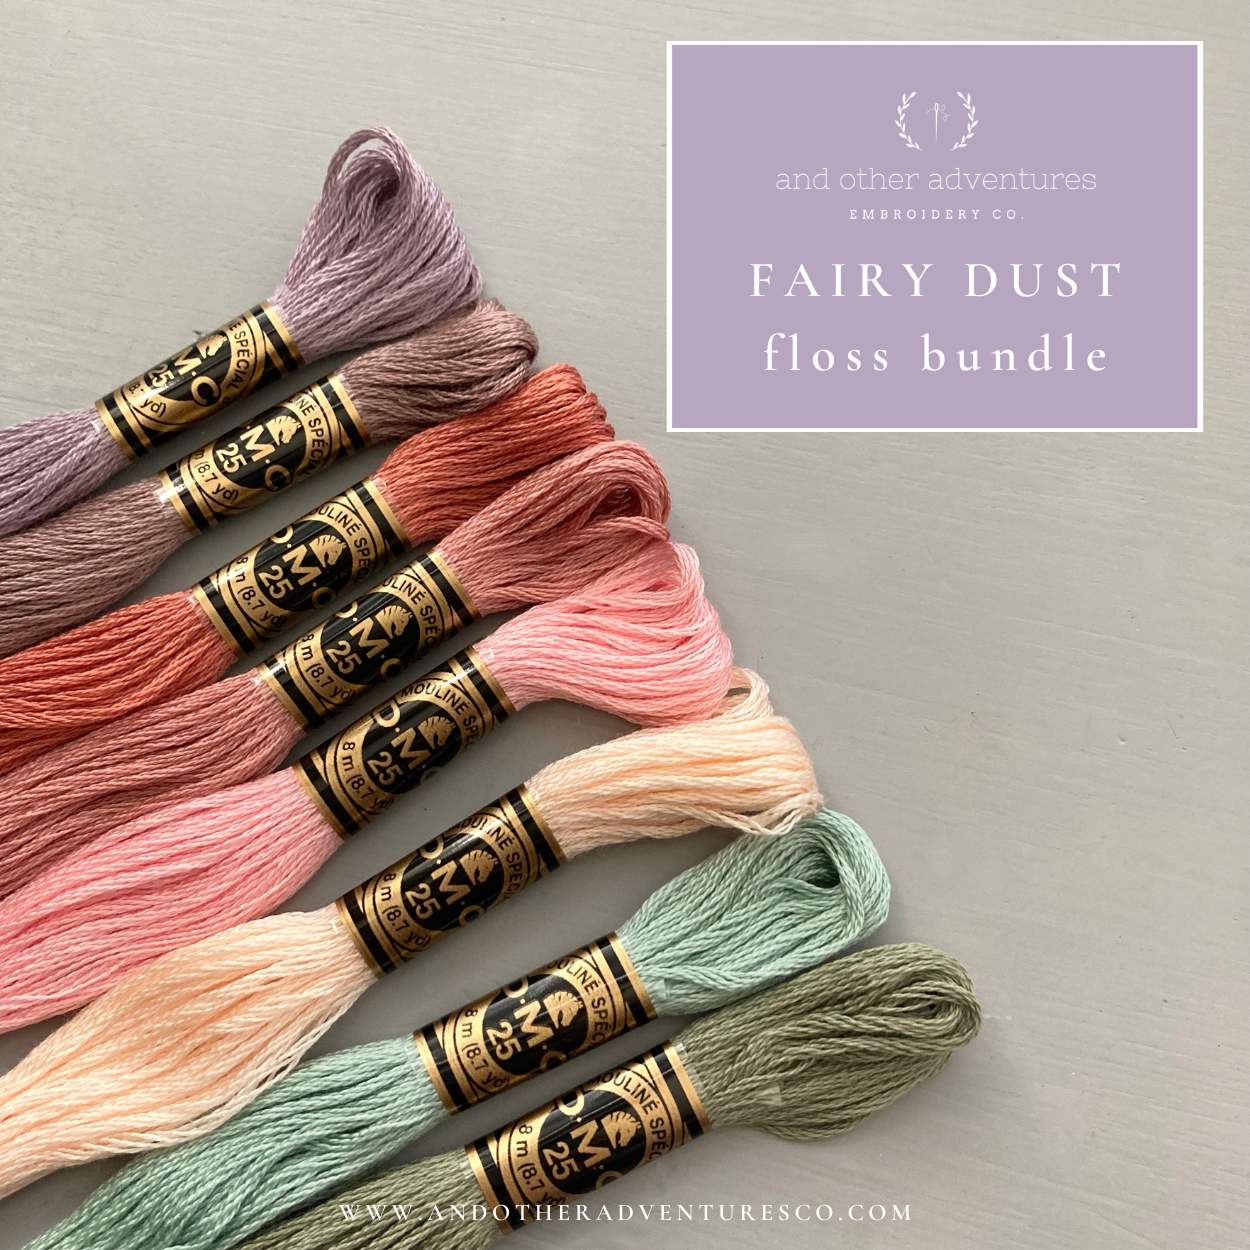 Embroidery Floss Bundle - Fairy Dust - And Other Adventures Embroidery Co